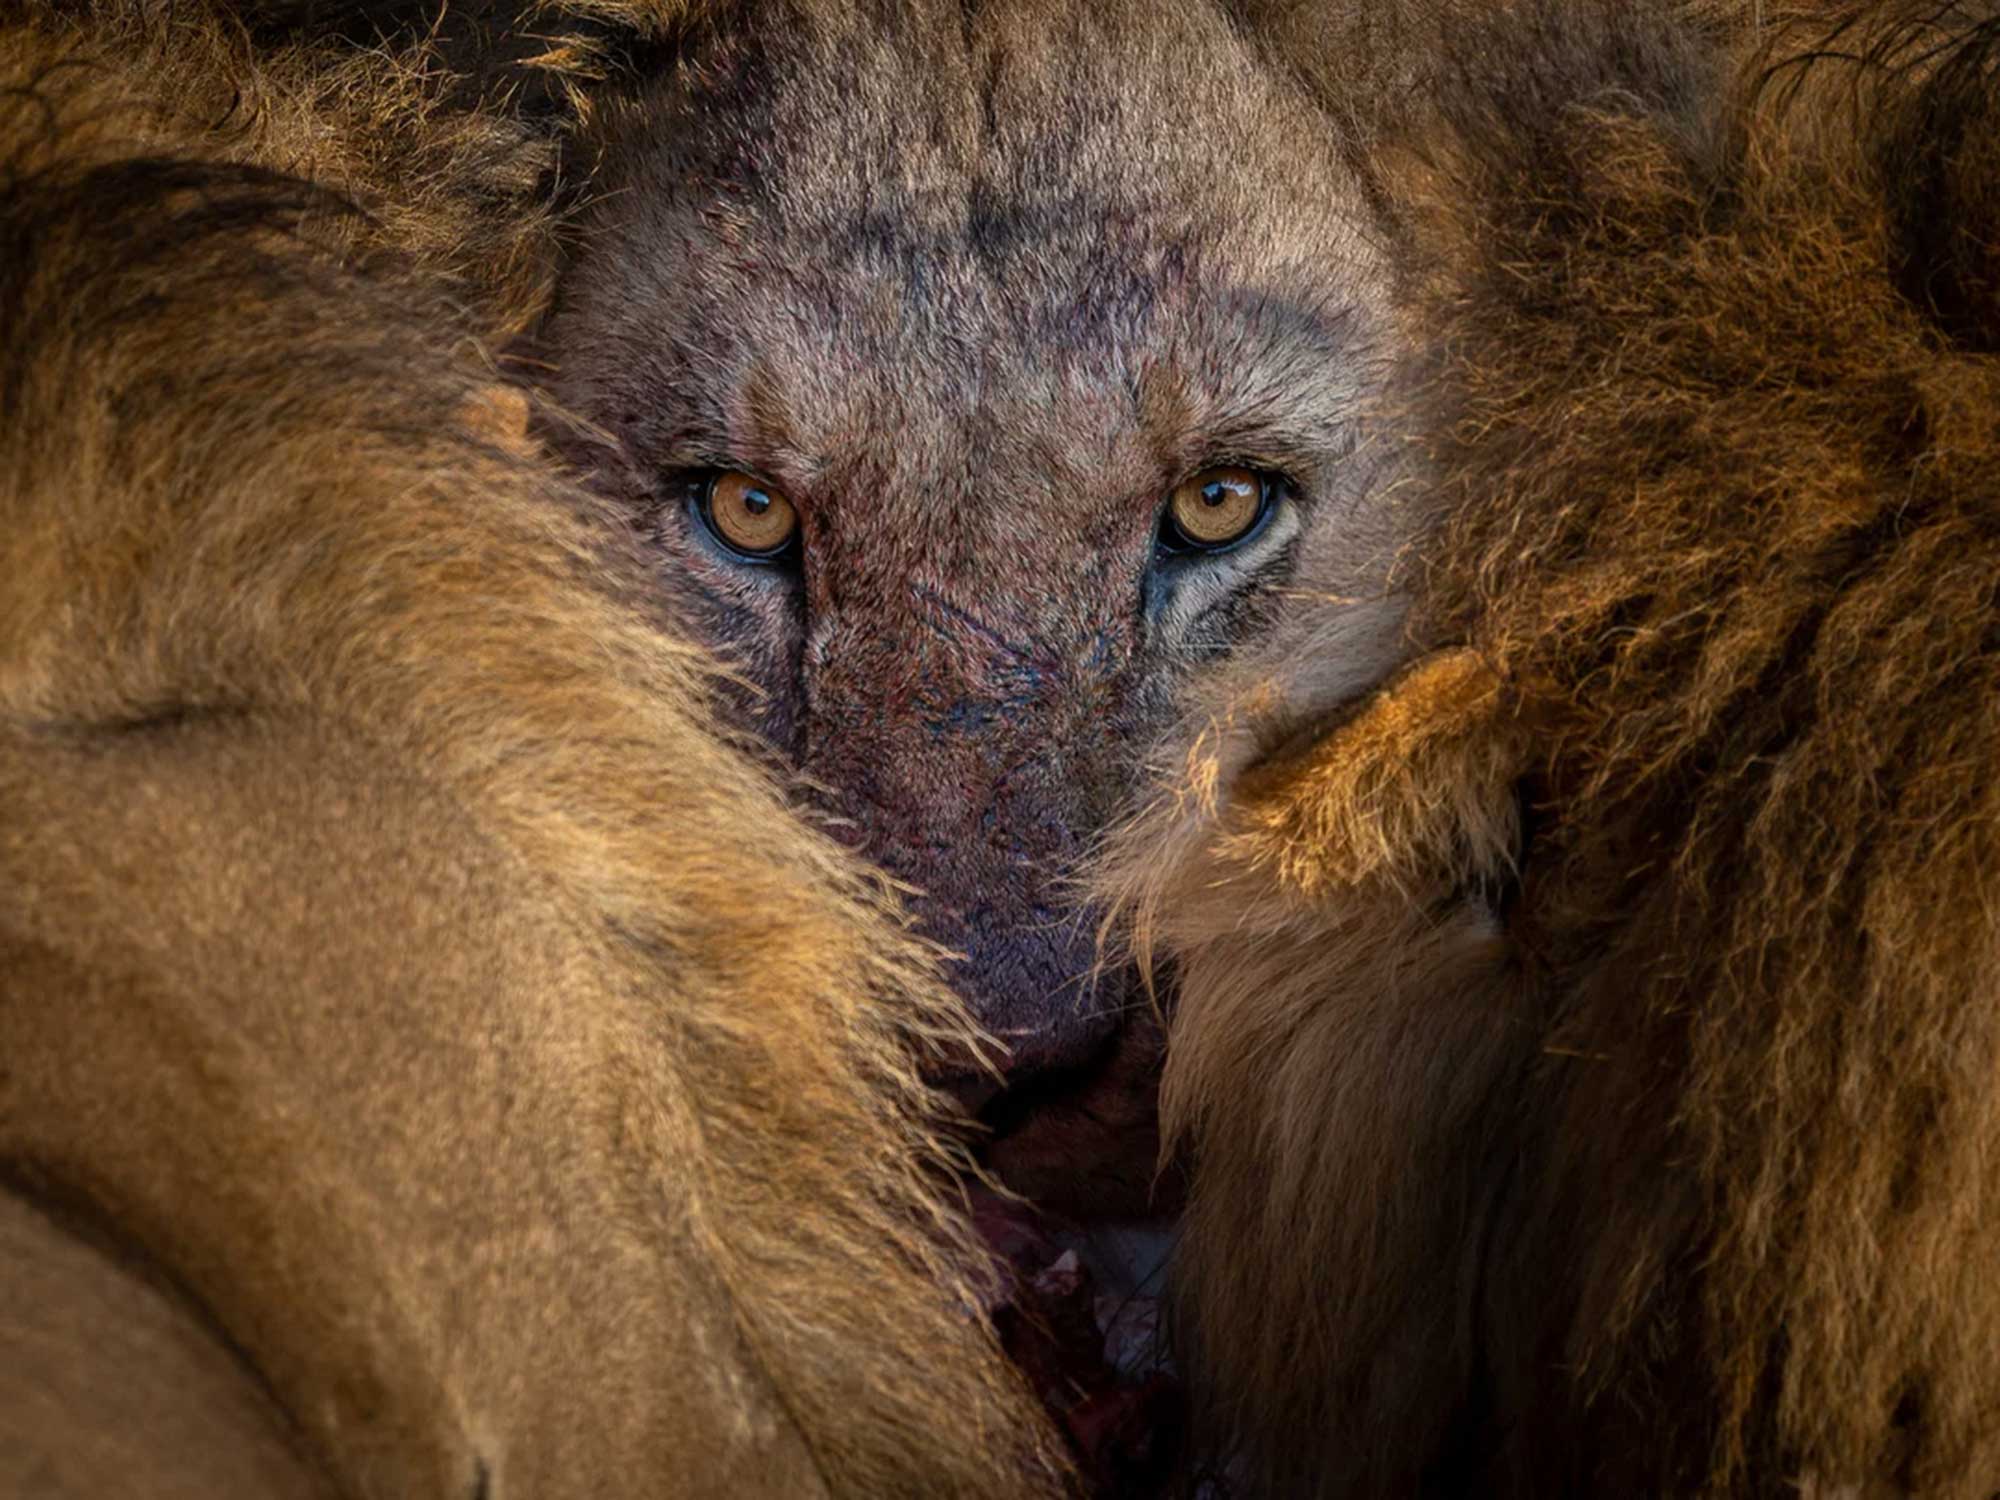 From lions to waterfalls, here are some of the year’s best nature photos